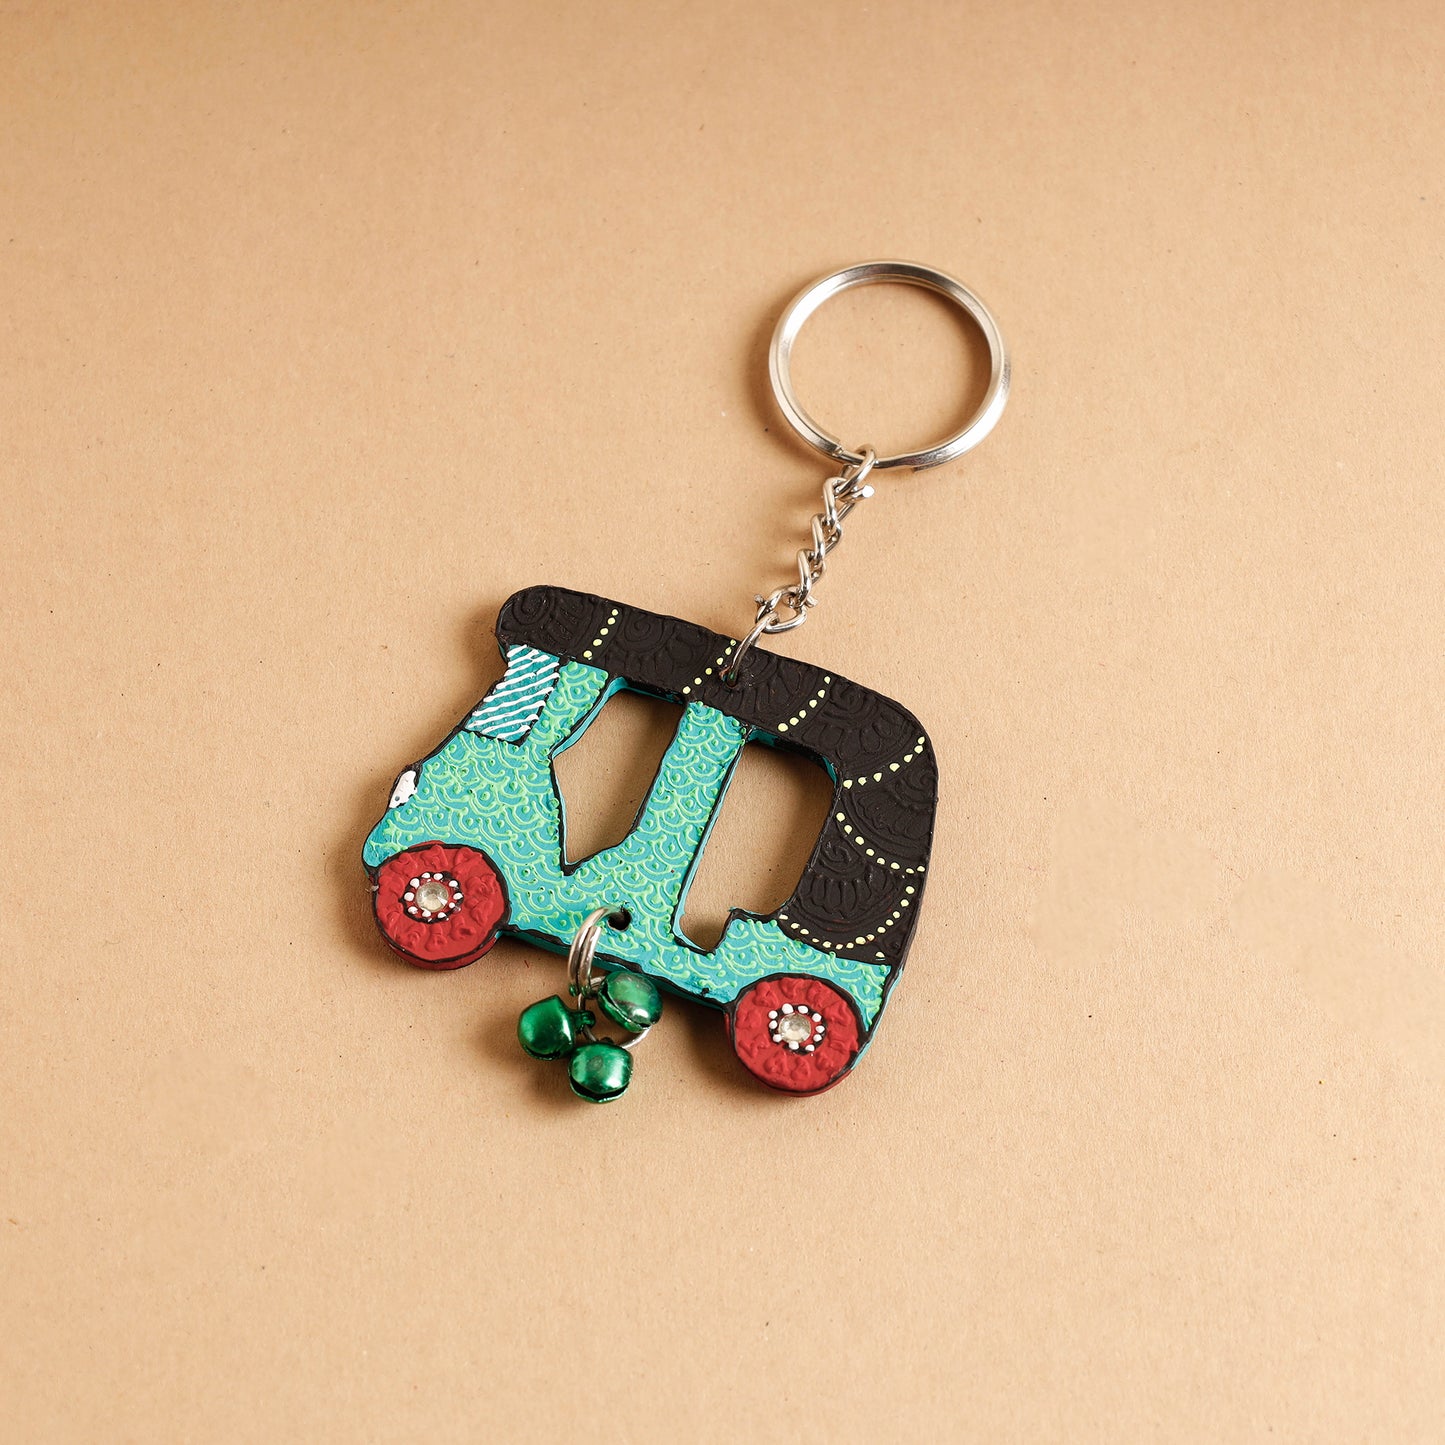 Auto - Abstract Pastel Handpainted Wooden Key Chain